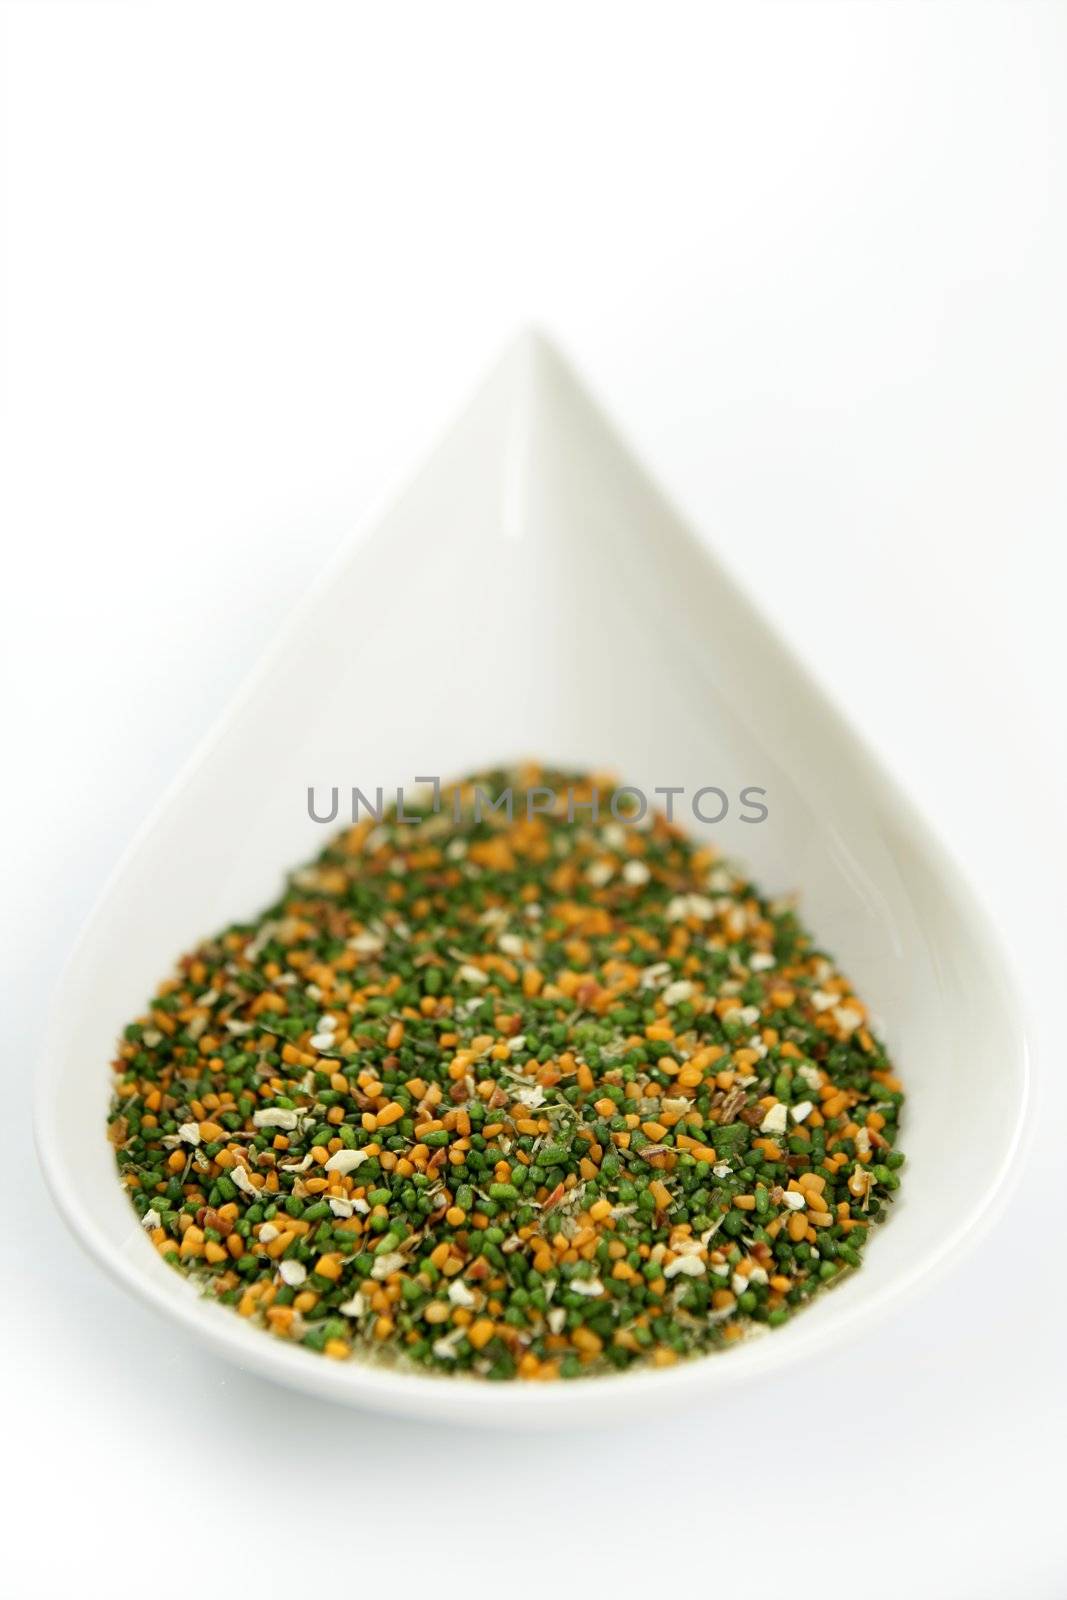 Multicolor vegetables semolina textures in white dish, white background